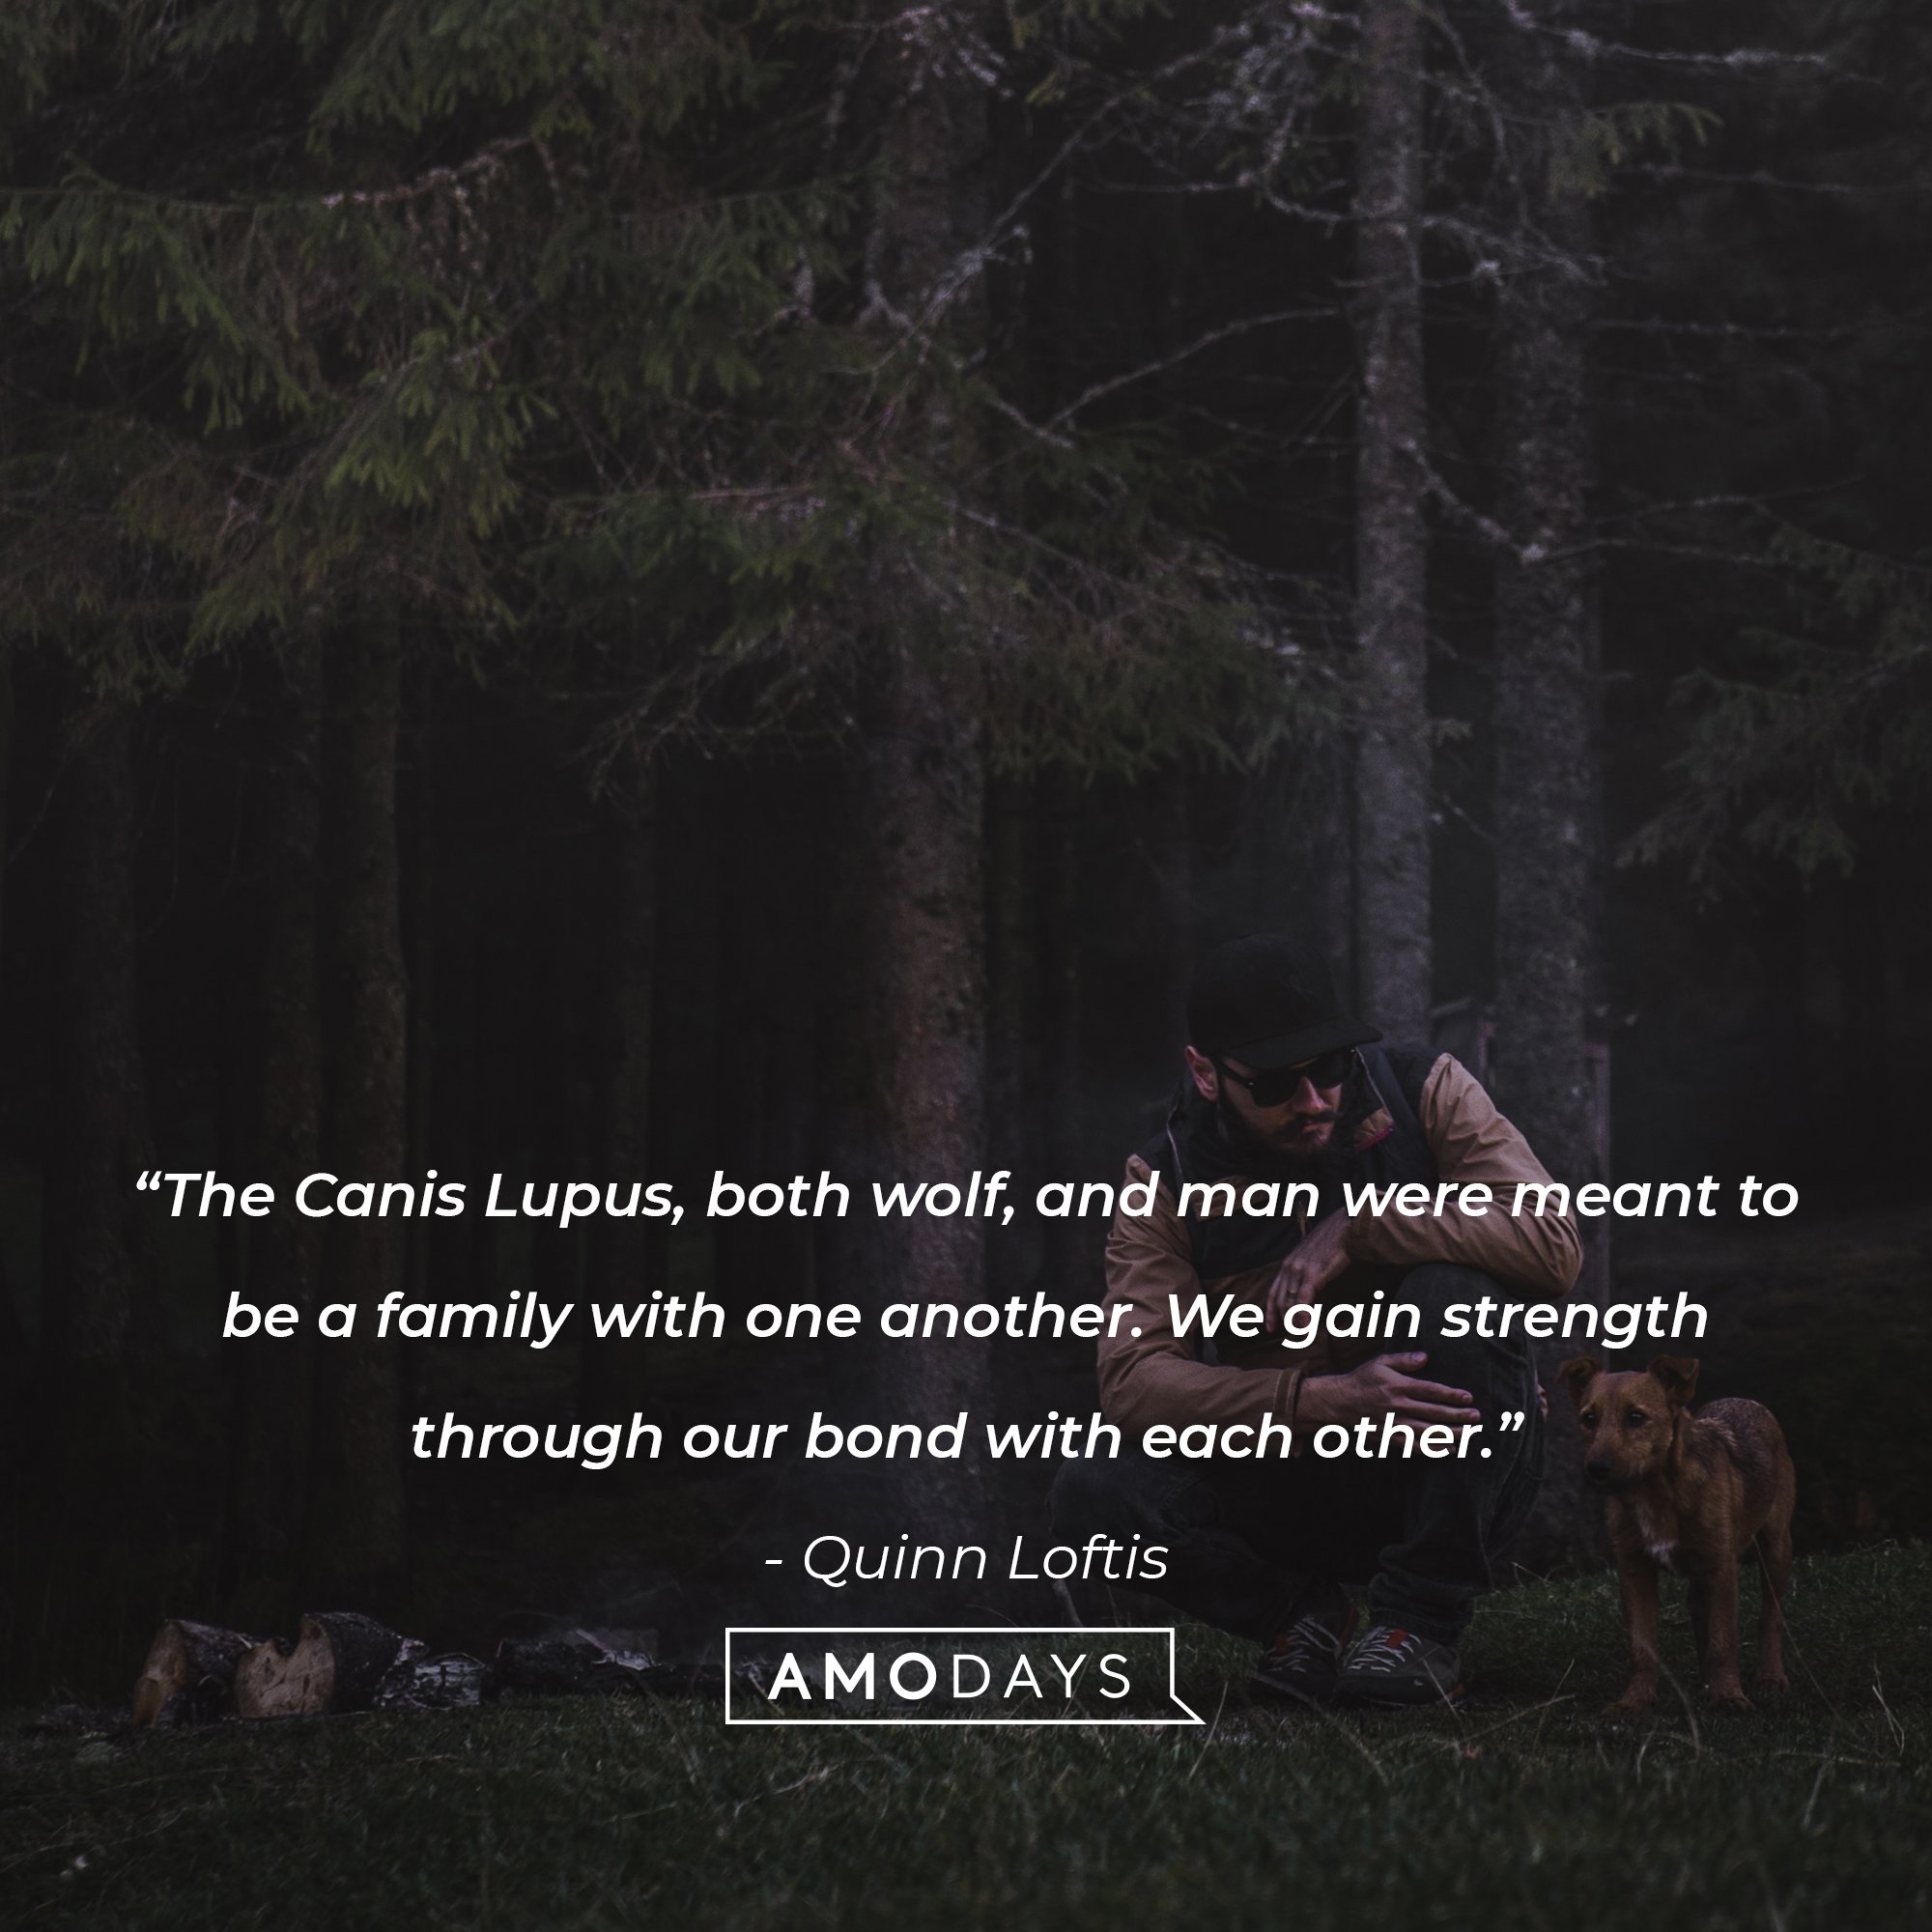 Quinn Loftis's quote: “The Canis Lupus, both wolf, and man were meant to be a family with one another. We gain strength through our bond with each other.” | Image: AmoDays